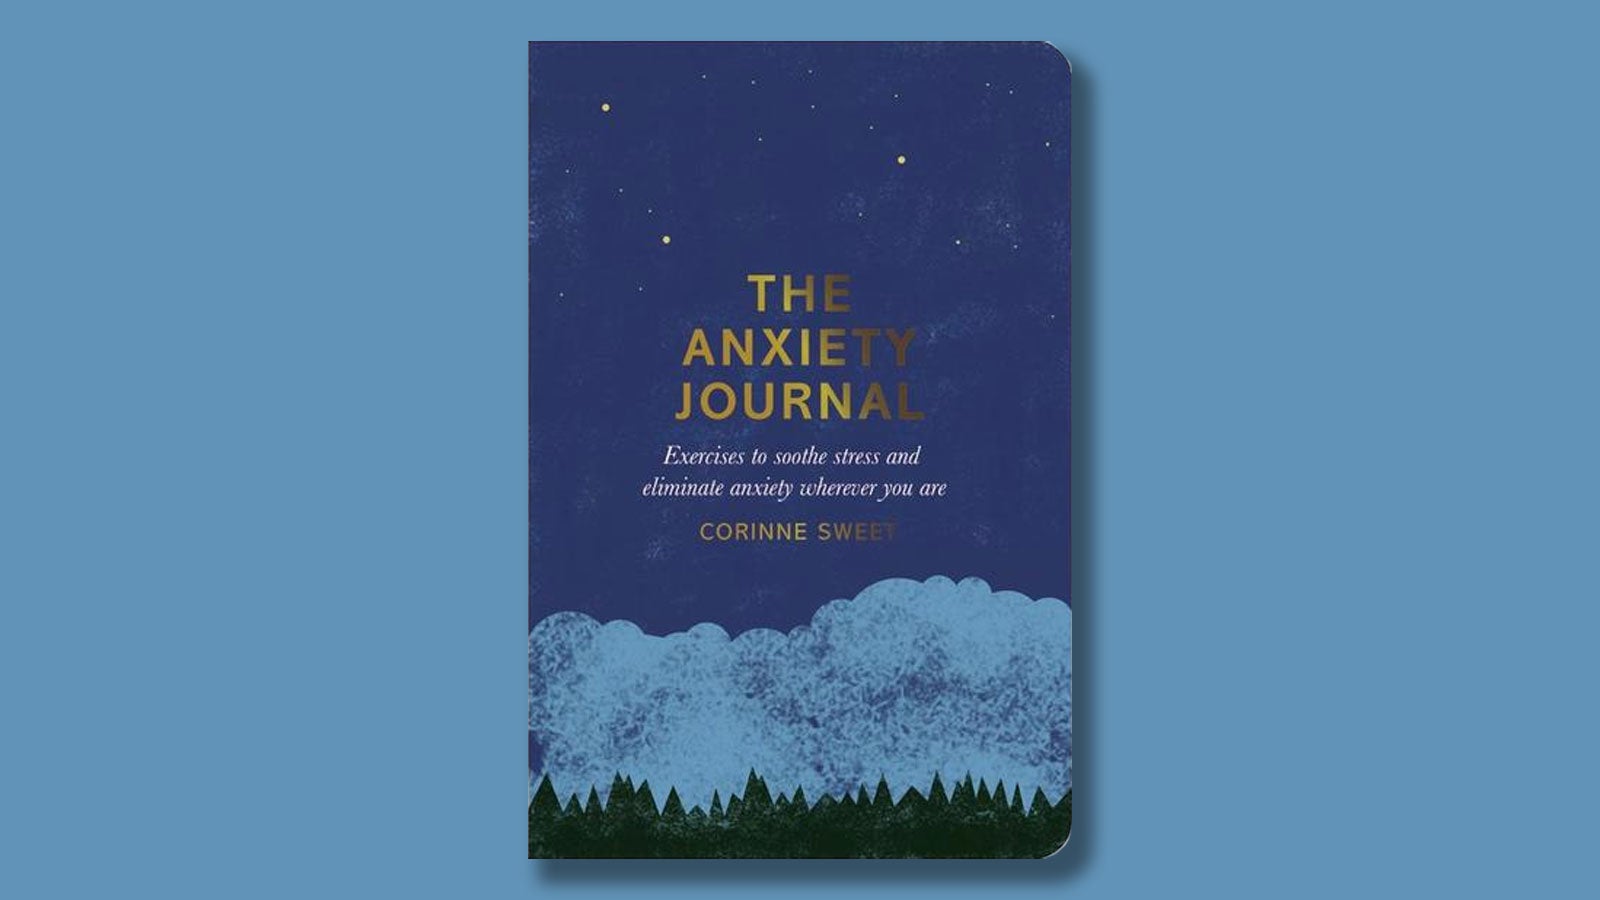 The Anxiety Journal by Corinne Sweet on a light blue background.